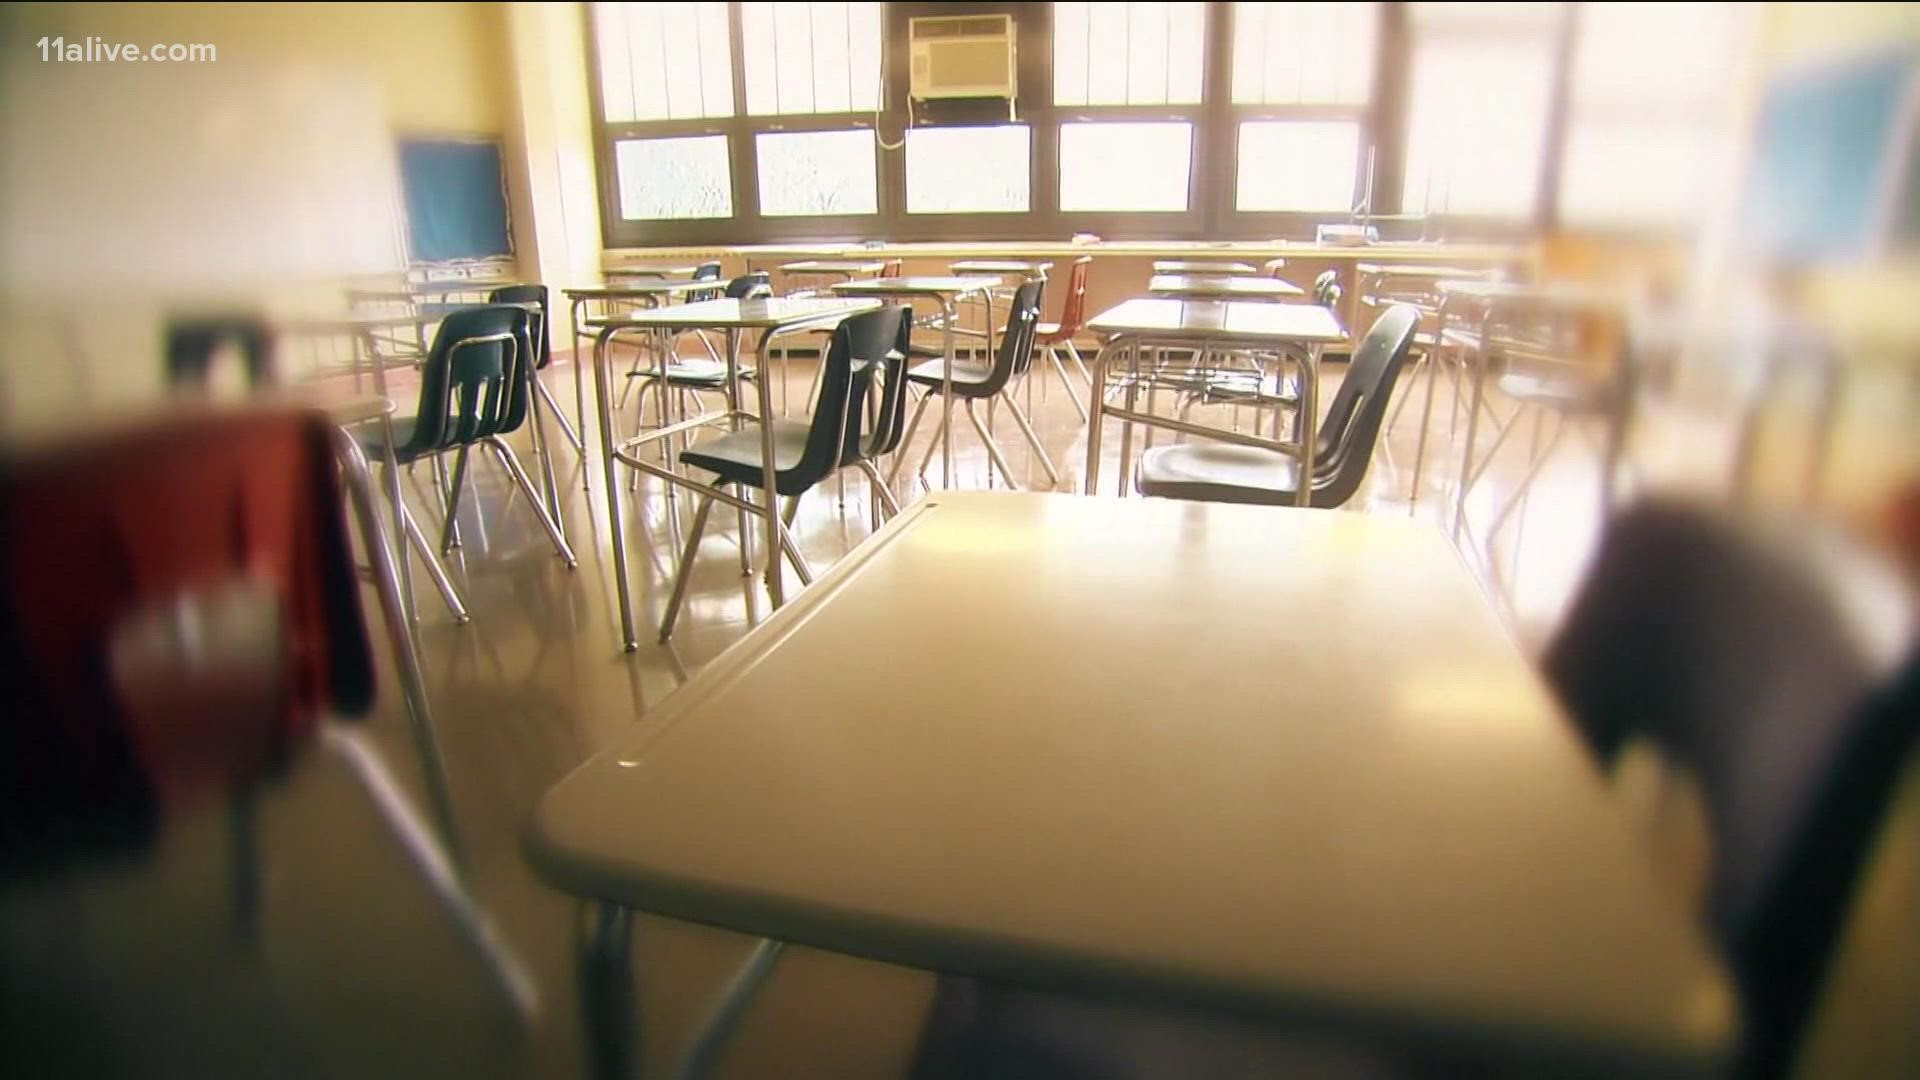 The US Department of Education just approved Georgia's plan to use $1.4 Billion of federal Covid-19 relief funds to address learning loss.